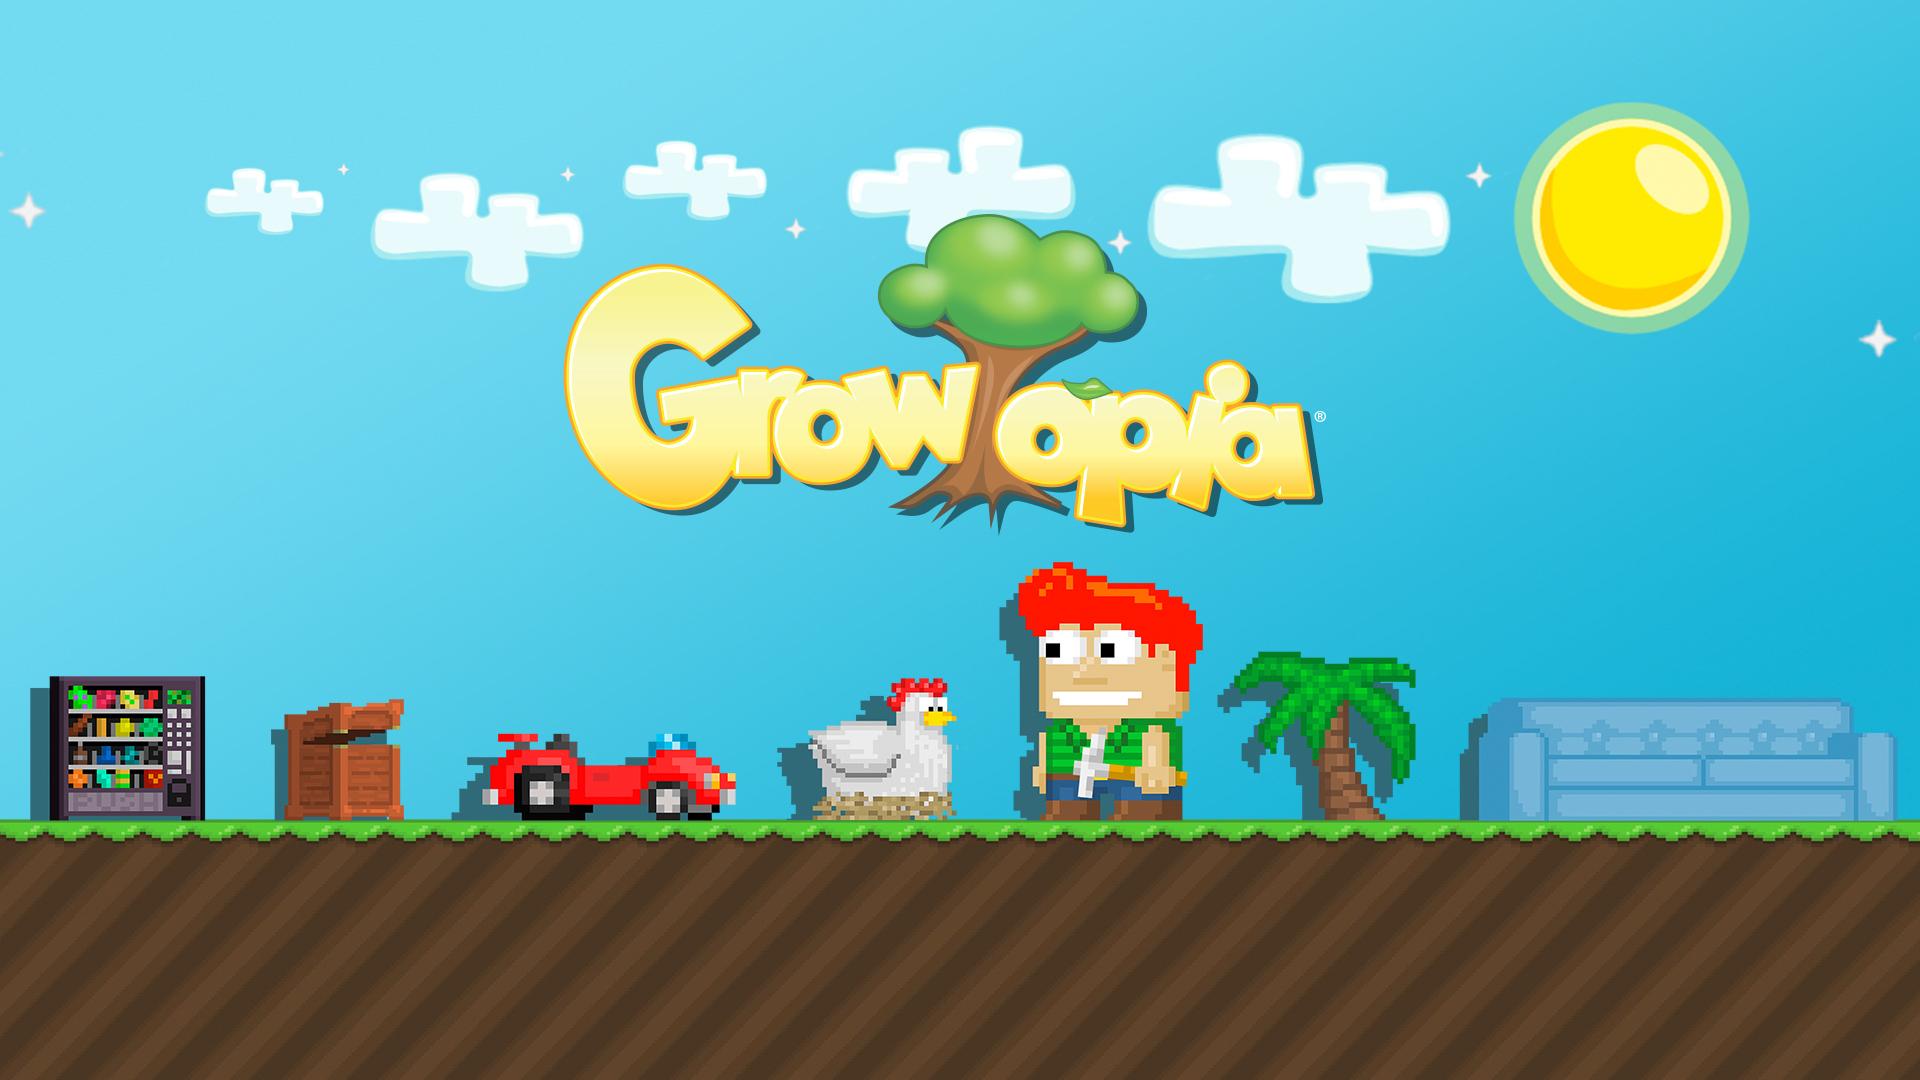 Art from Growtopia showing a small person and a chicken next to a racecar and a tree